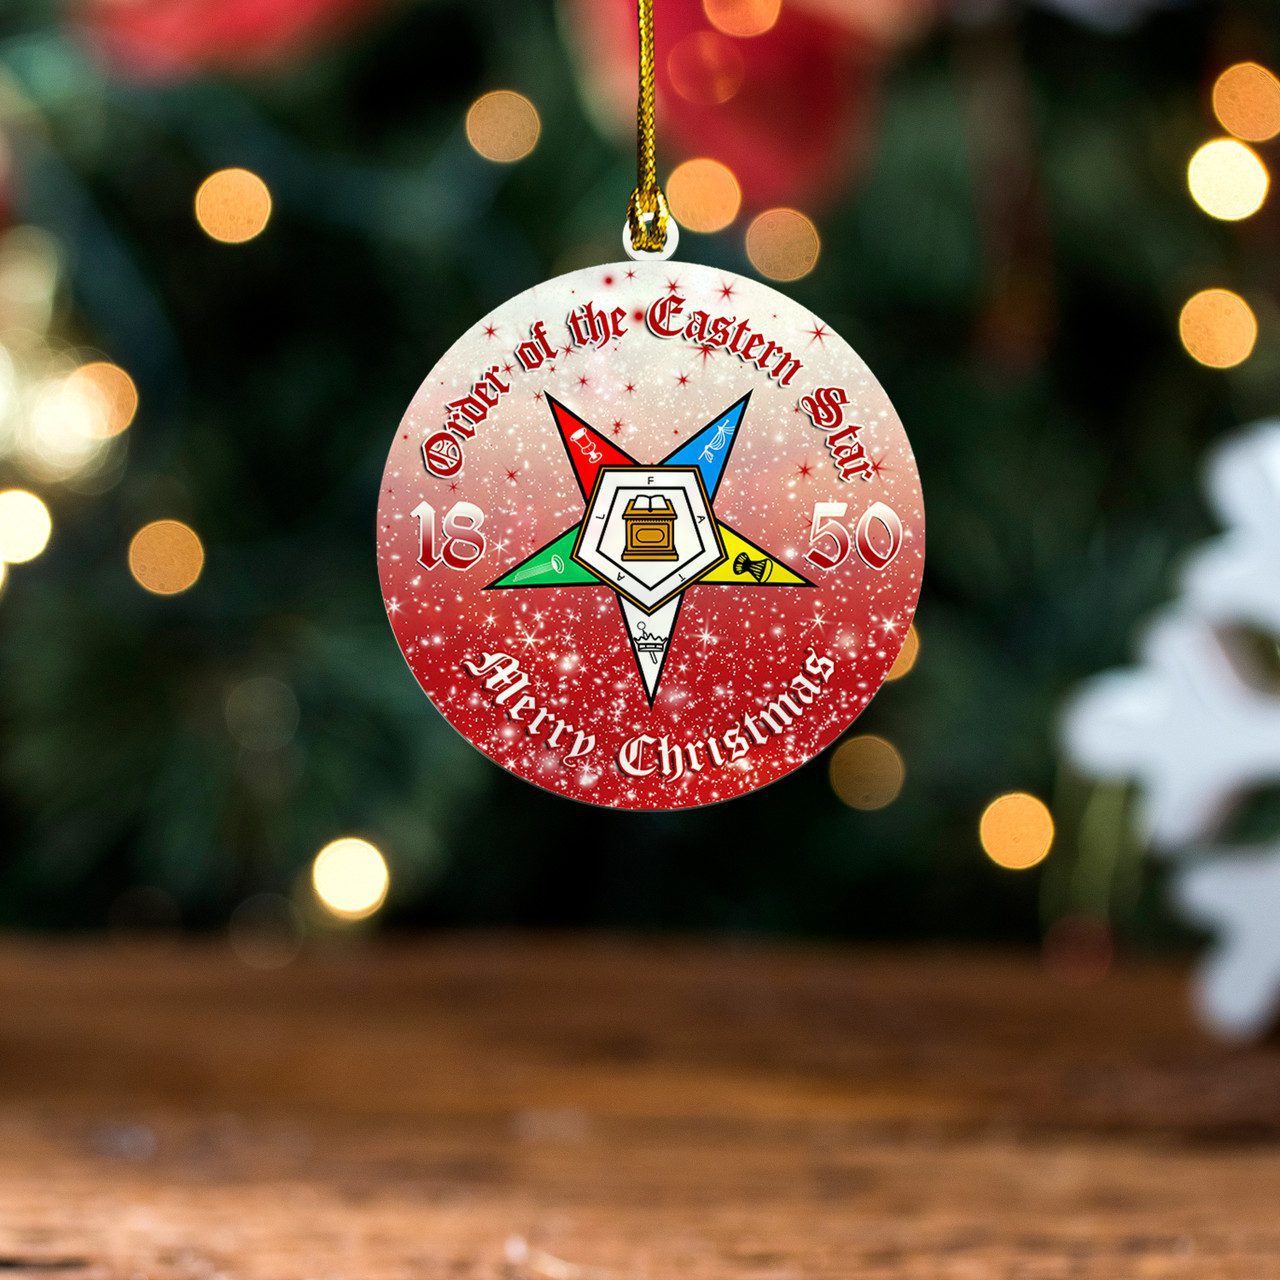 Order of the Eastern Star Acrylic Ornament Merry Christmas